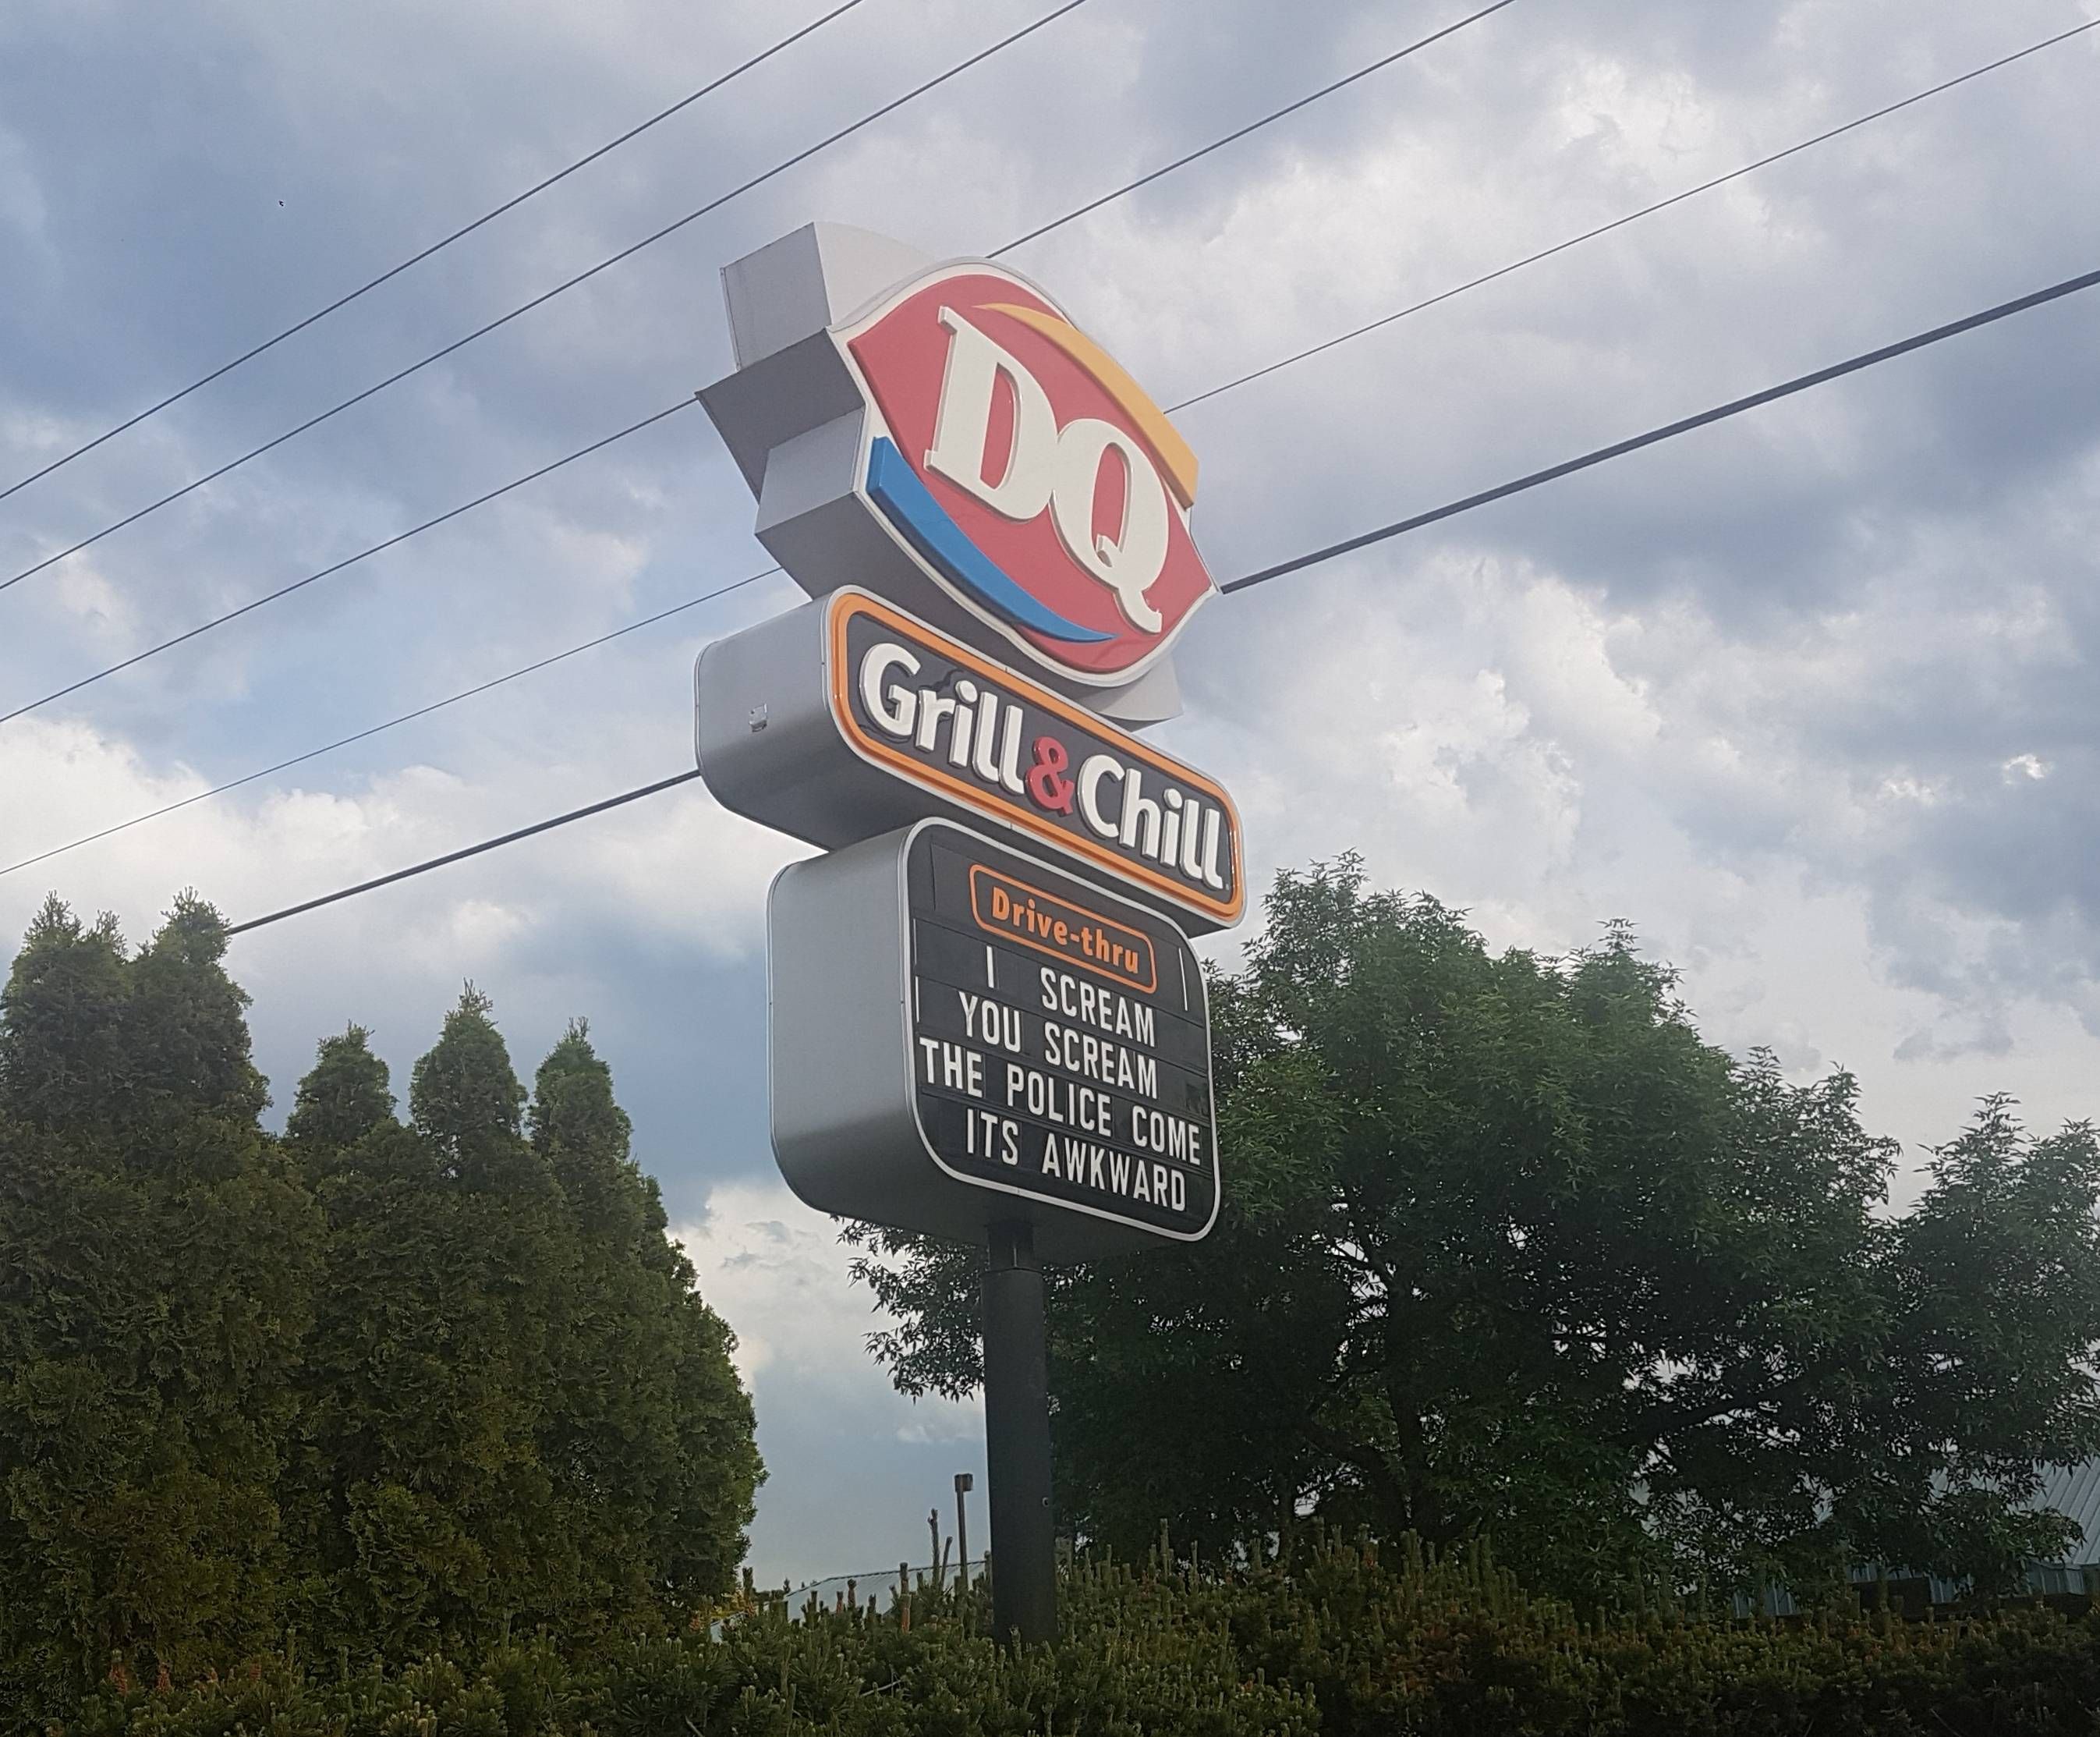 Found this at a local DQ